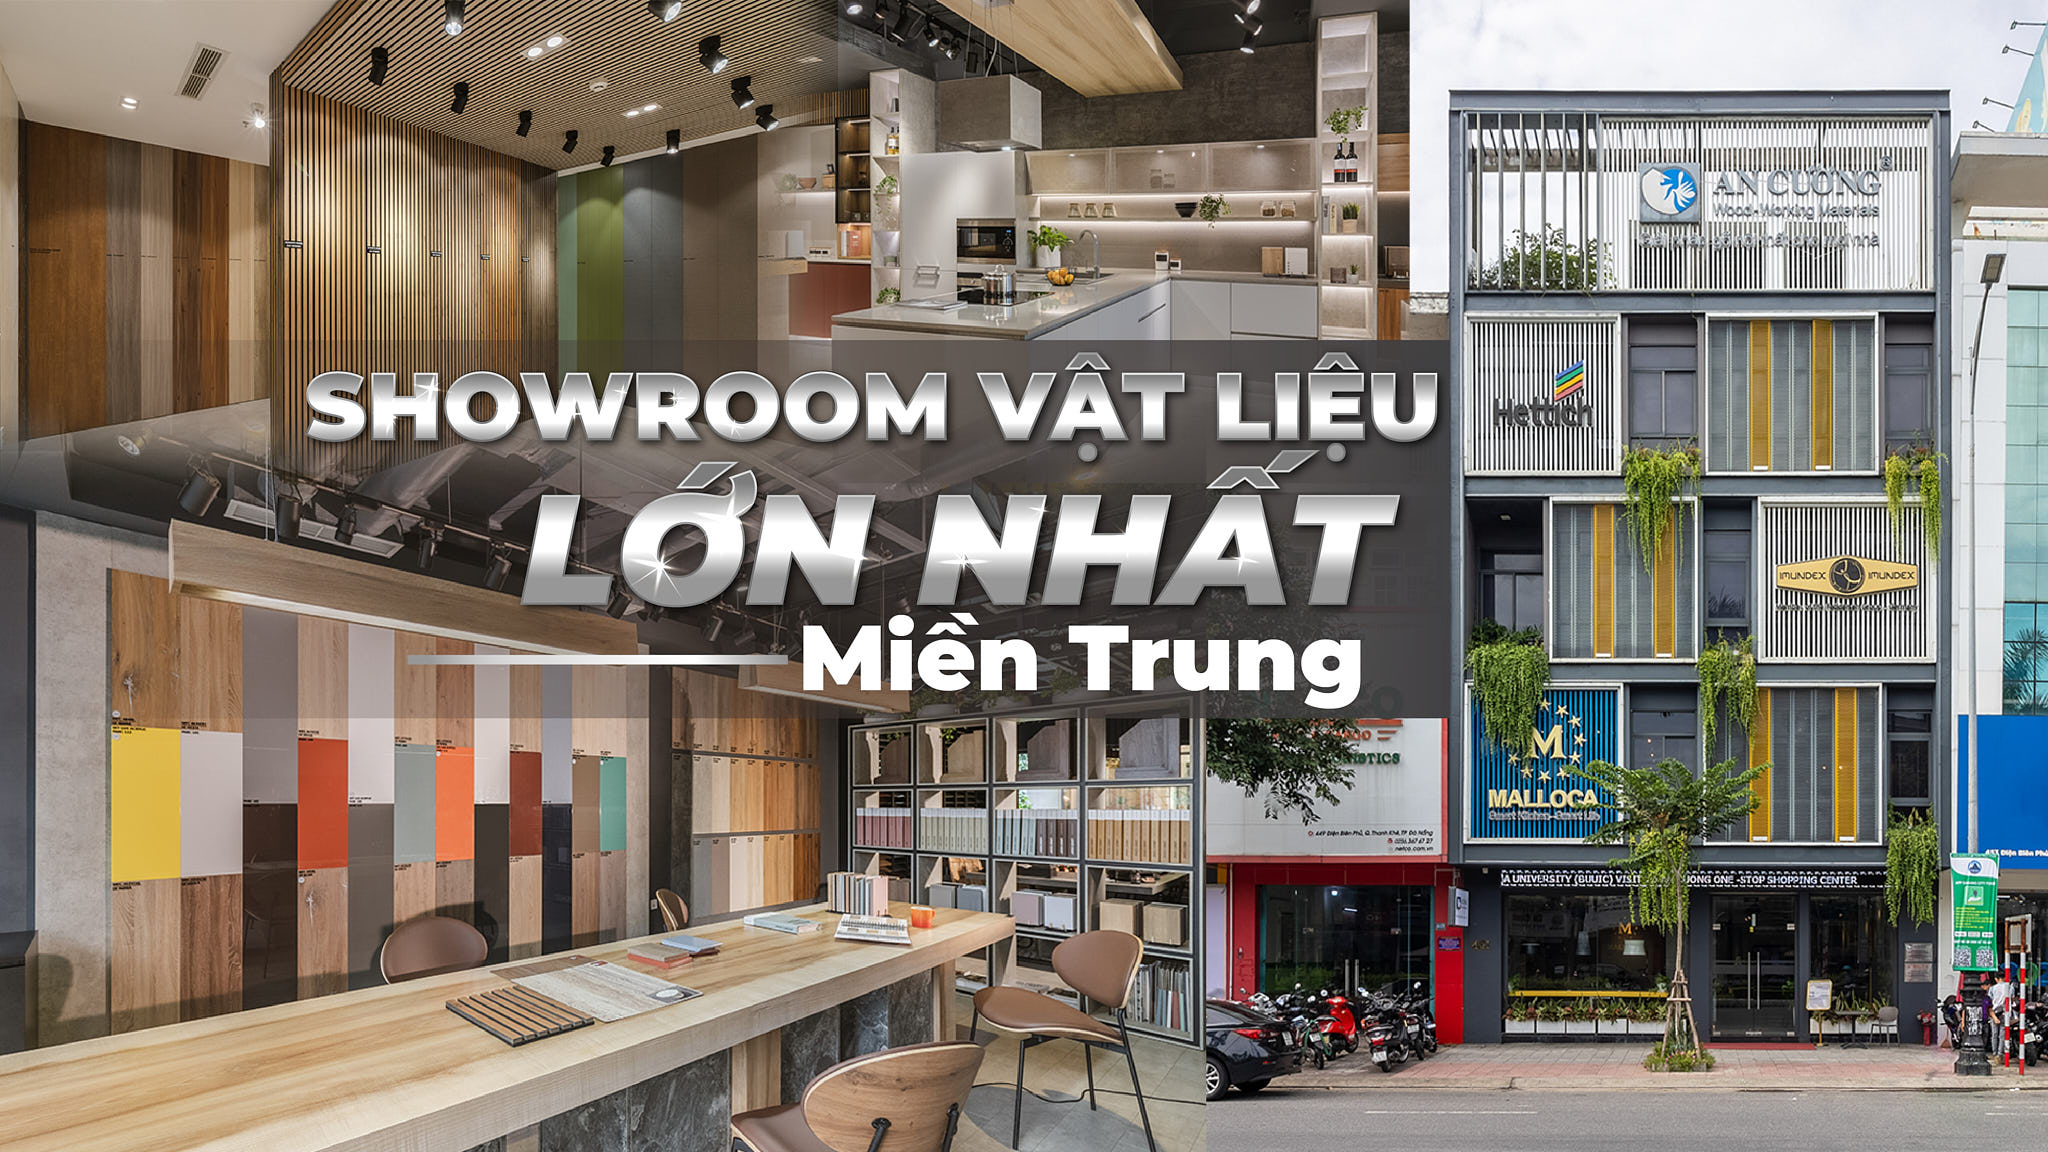 Da Nang One-Stop Shopping Center - The Largest Material Showroom in Central Vietnam | An Cuong